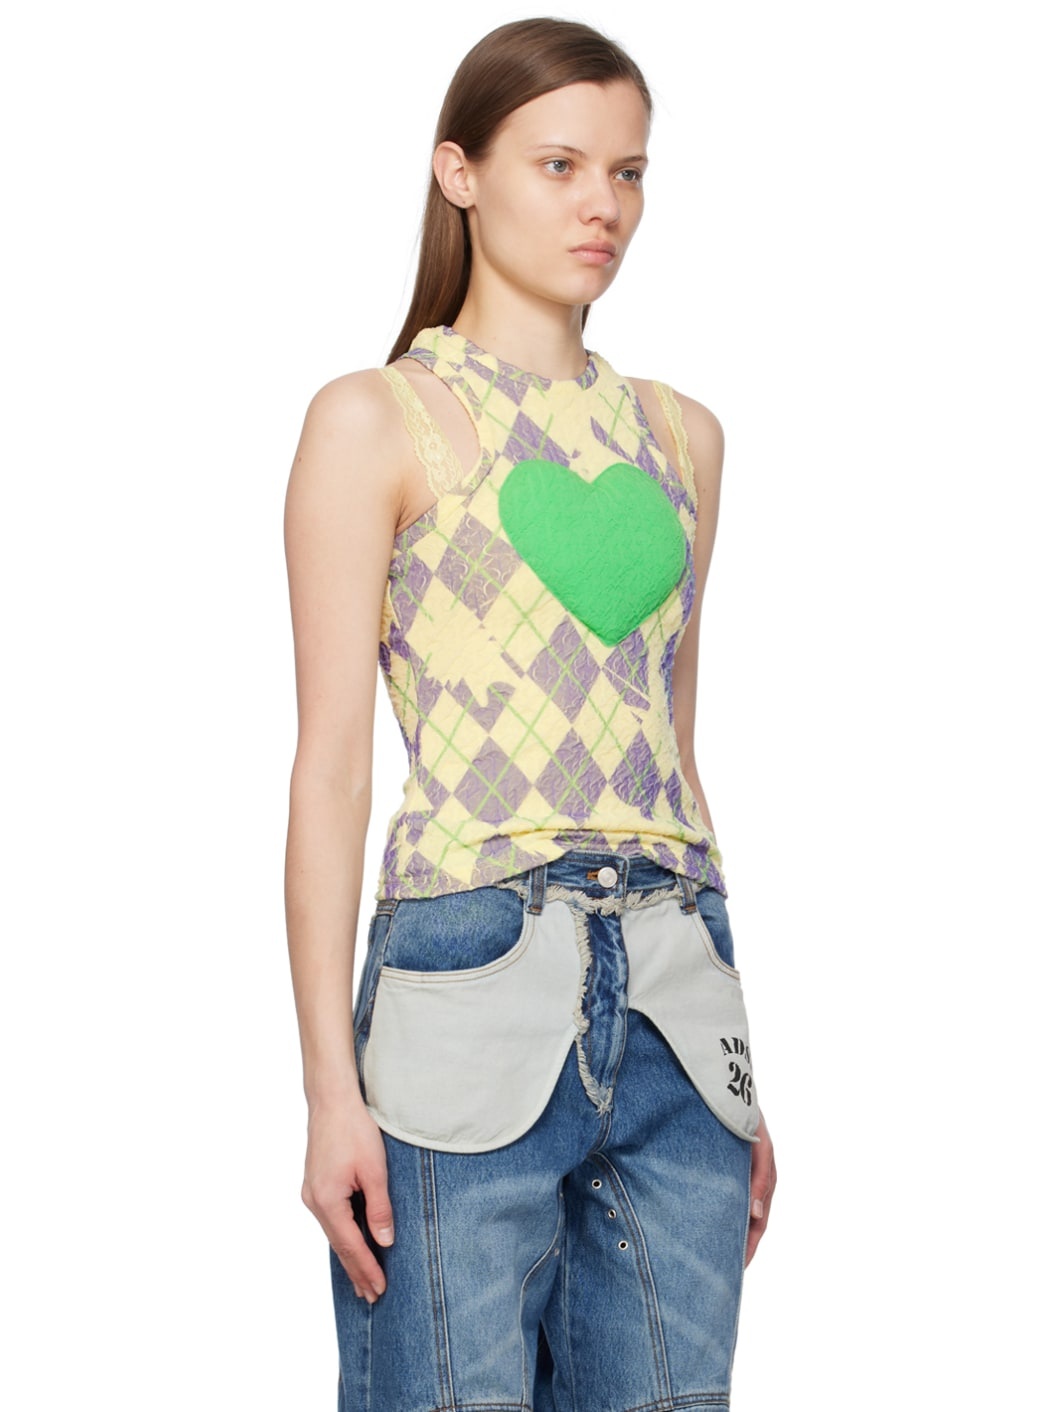 SSENSE Exclusive Yellow Puffy Heart Saver Tank Top - 2